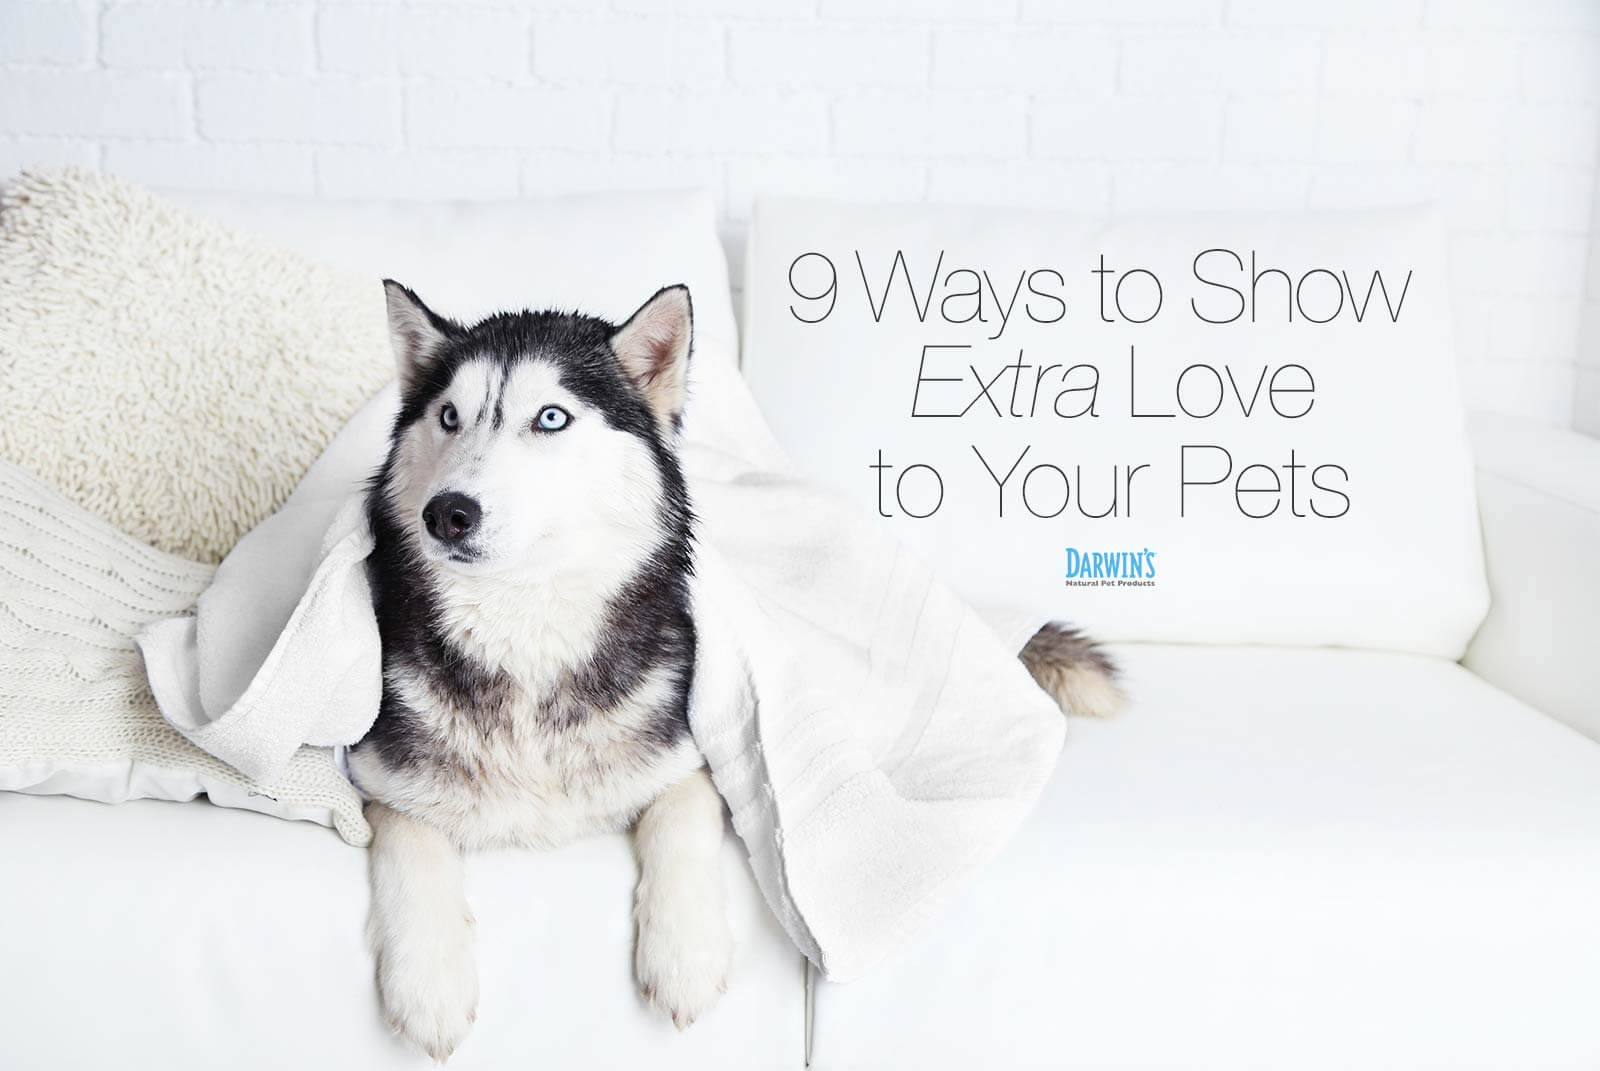 Fur the Love of Pets!